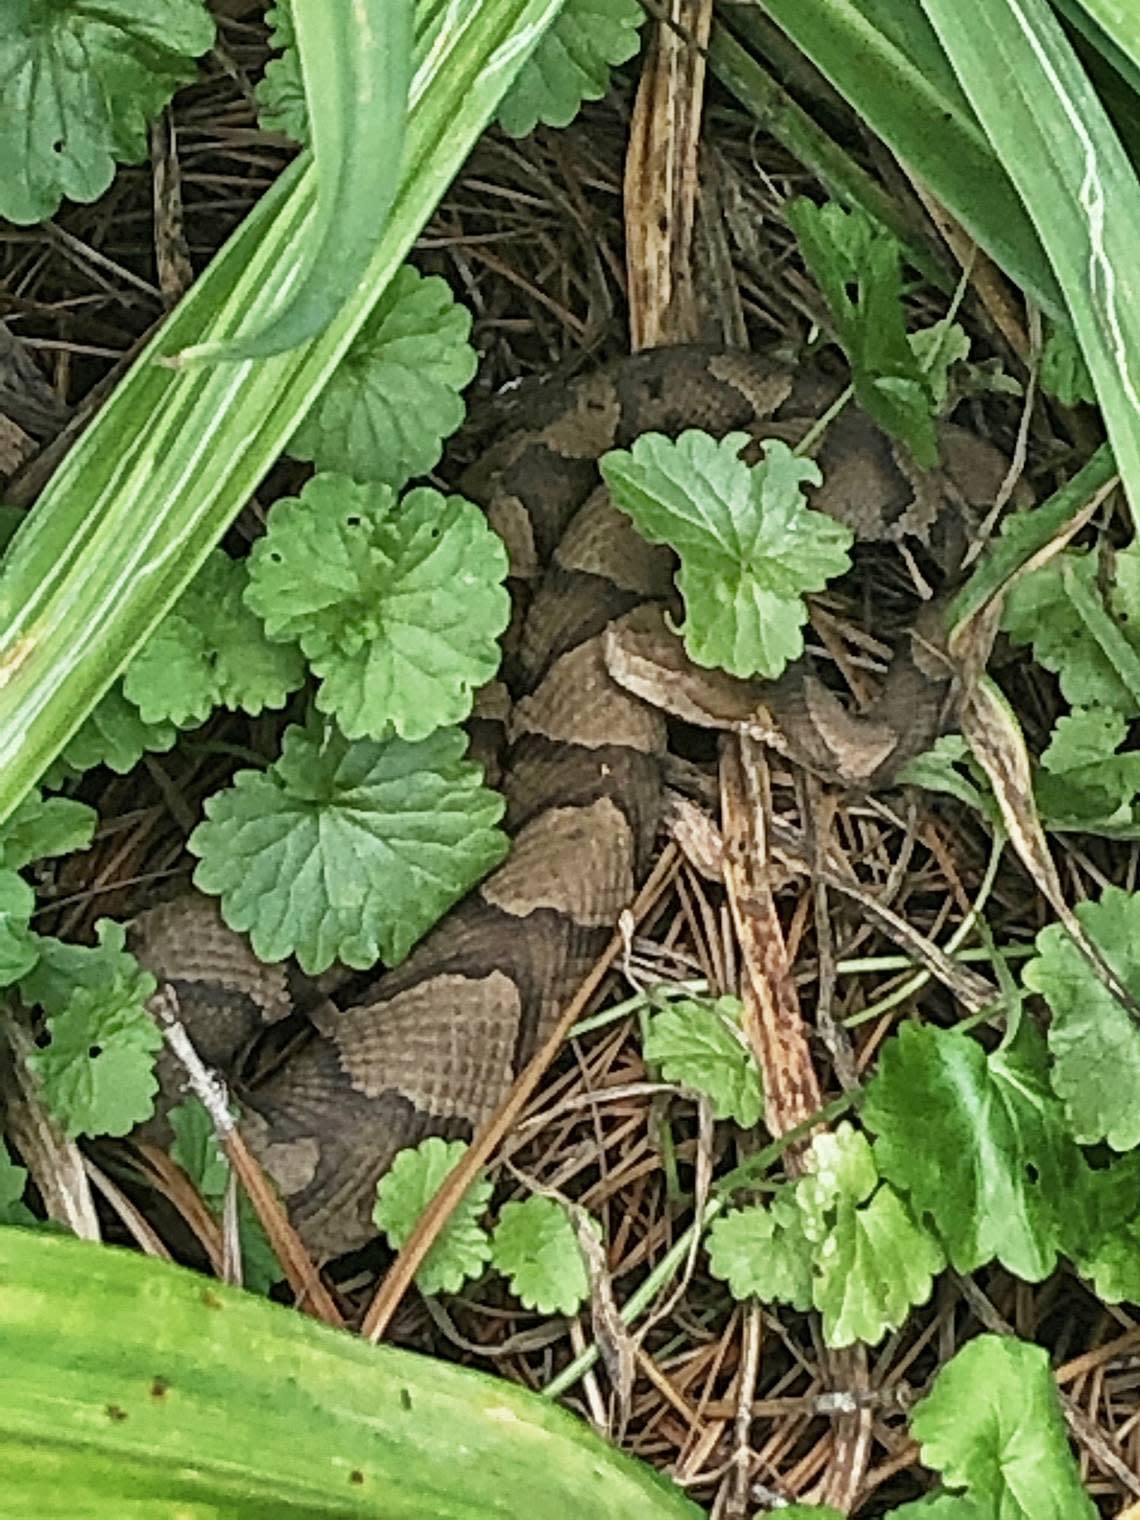 This copperhead snake, estimated to be 2 to 3 years old, was discovered in a Raleigh garden on Thursday, June 13, 2019. It was captured by Southern Wildlife and Land Management in Raleigh and relocated to game land away from homes near Jordan Lake.